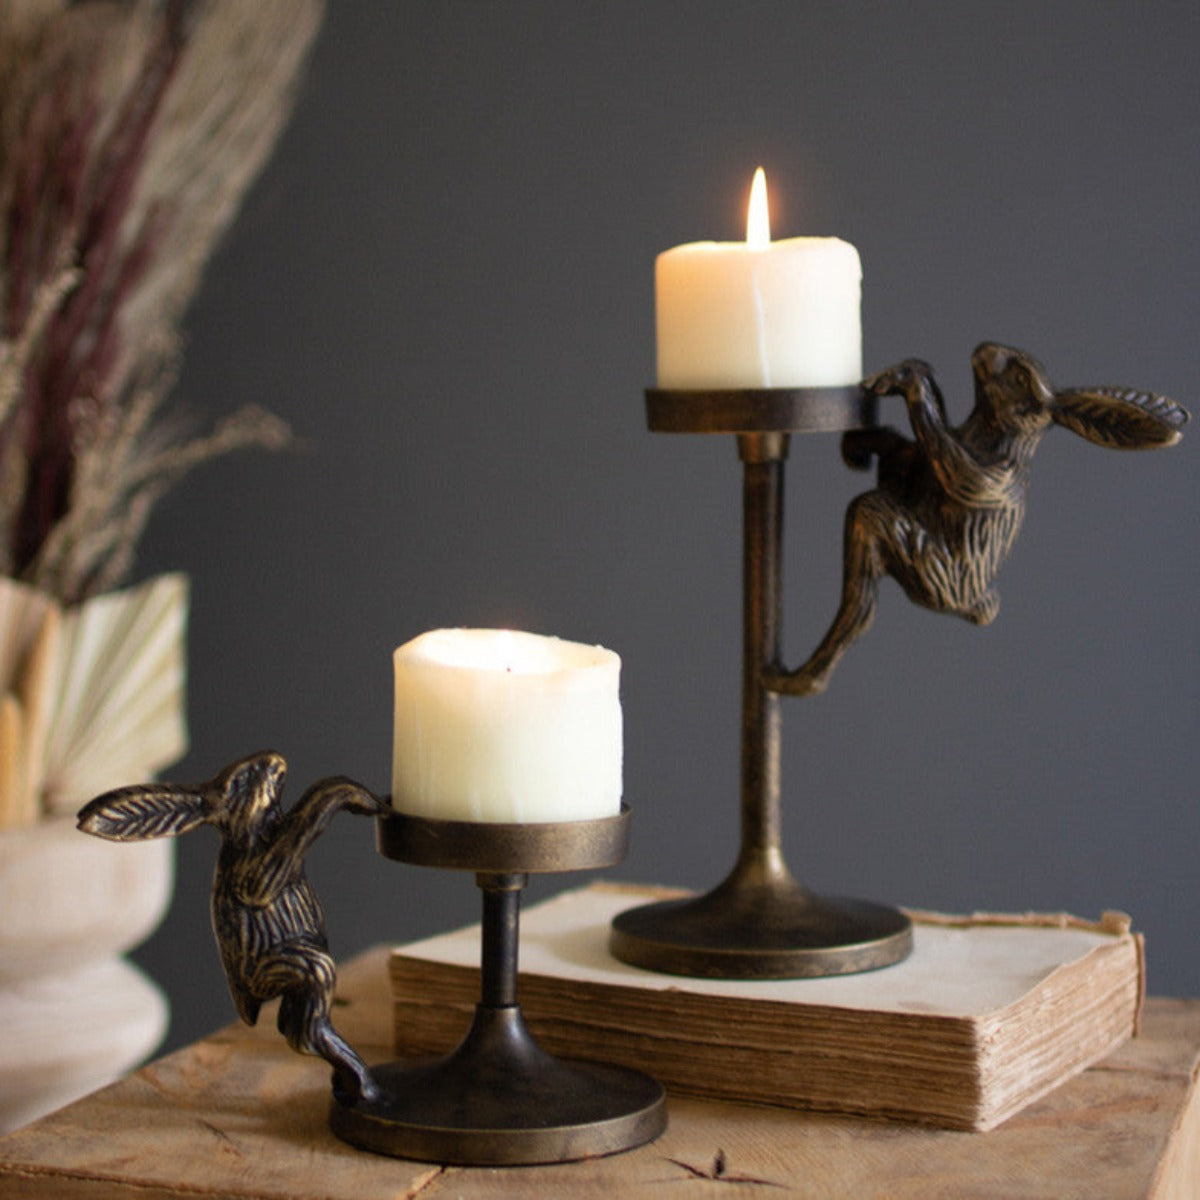 Hanging Rabbit Candle Holders